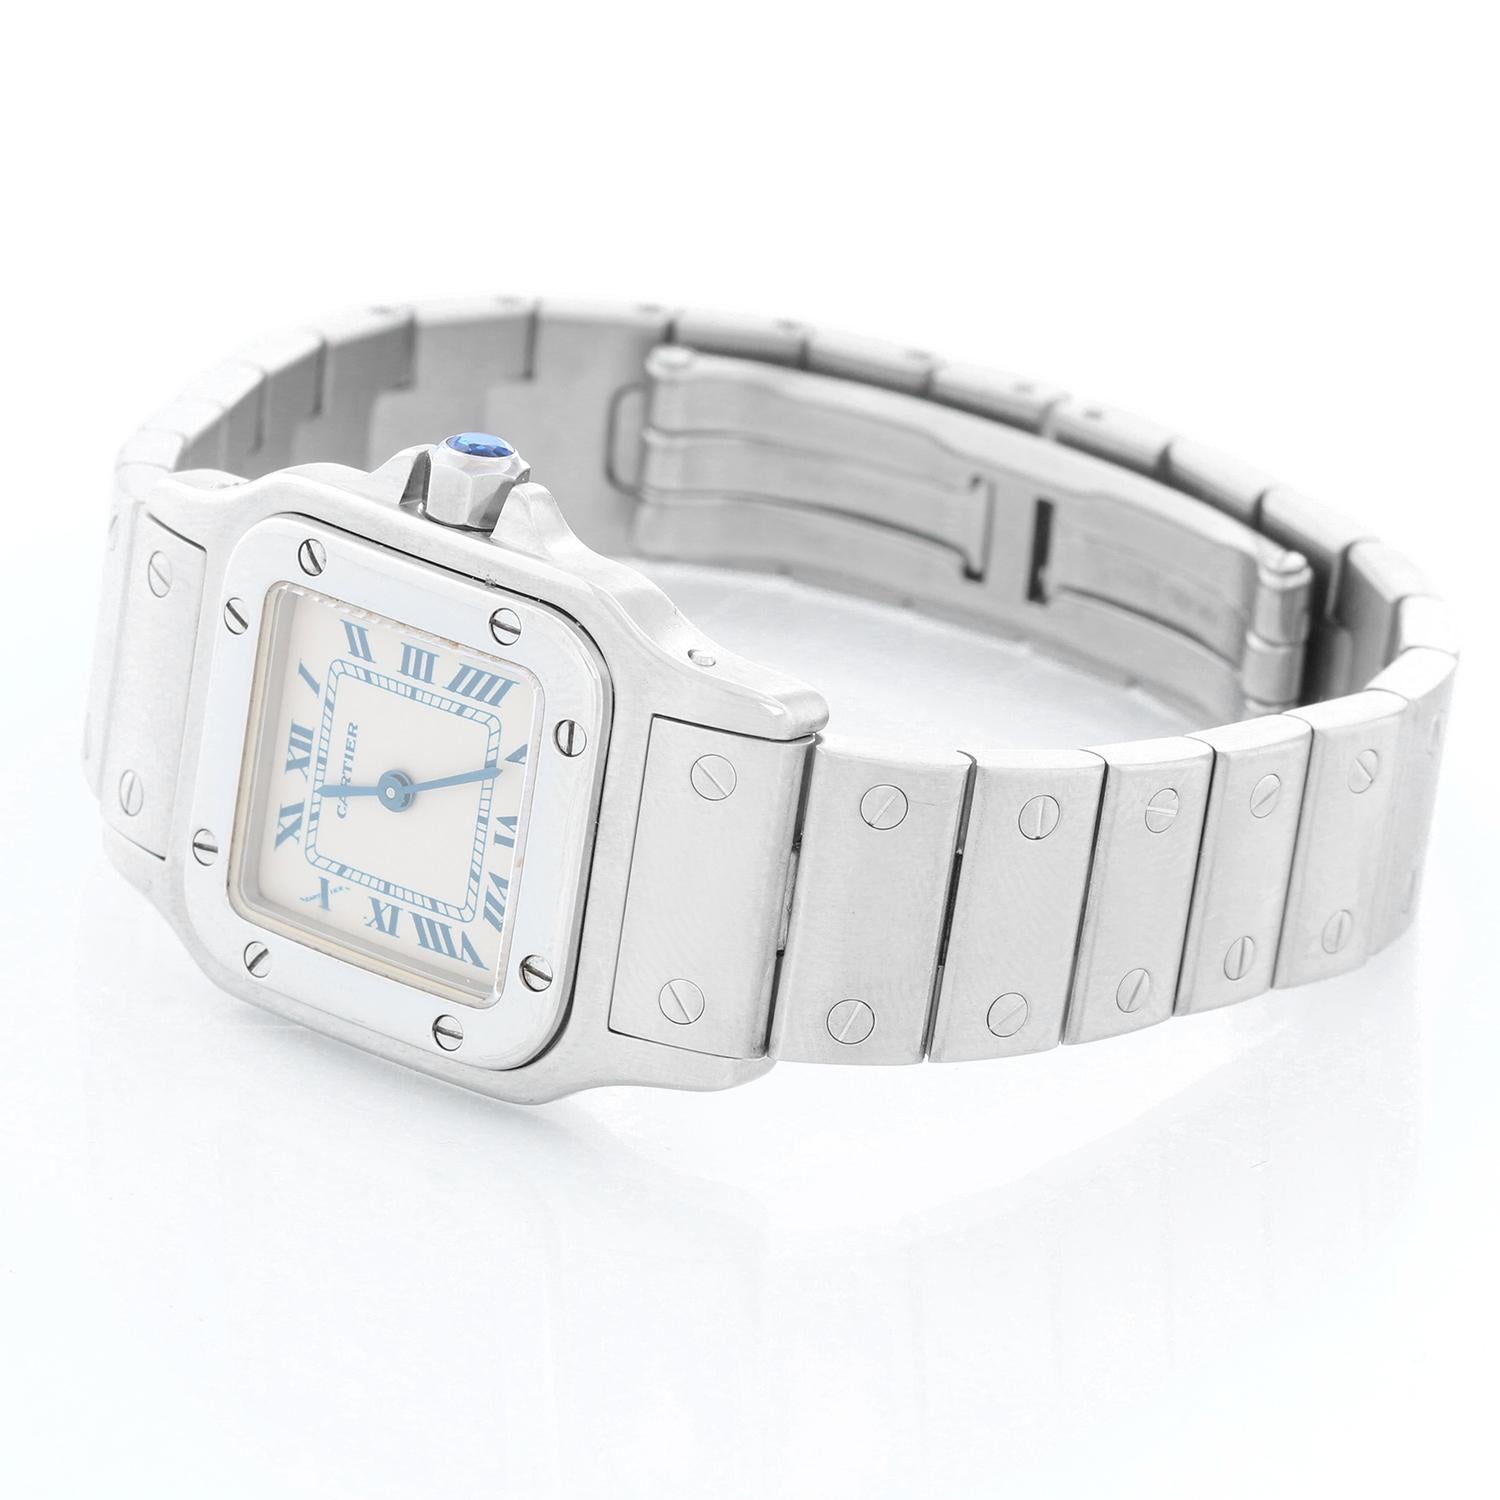 Cartier Santos Galbee Small Ladies Watch 1565 - Quartz. Stainless steel case (24mm x 35mm). Ivory dial with blue Roman numerals. Stainless steel Santos bracelet; will fit a 6 3/4 inch wrist . Pre-owned with custom box. 